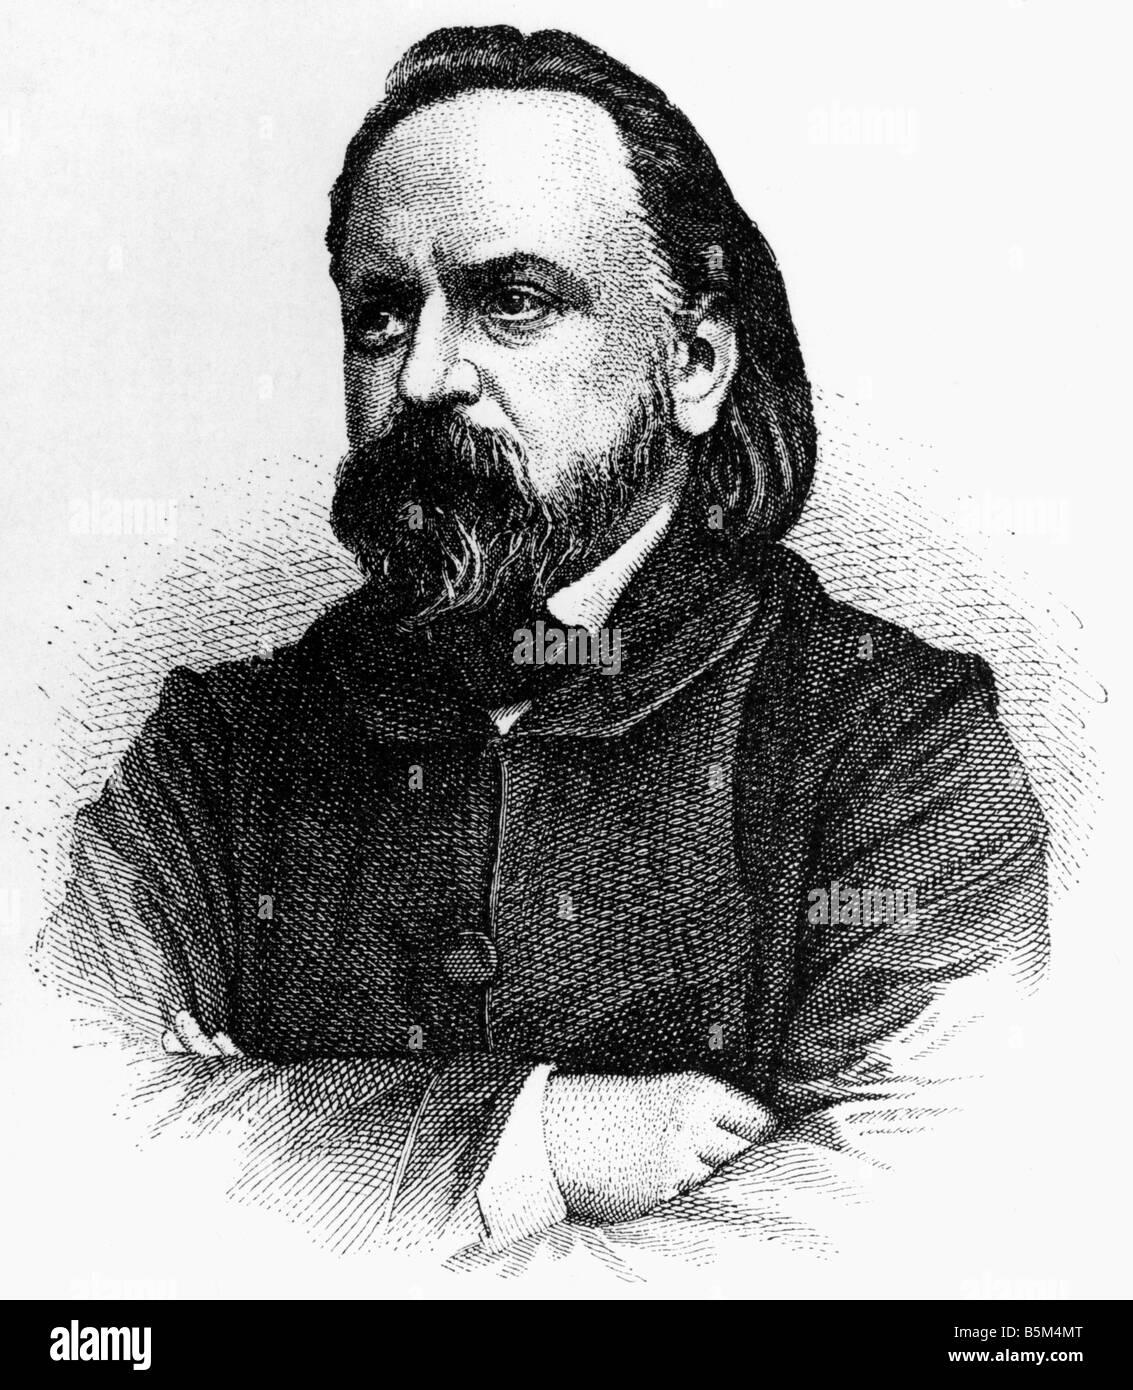 Herzen, Alexander, 6.4.1812 - 21.1.1870, Russian author / writer and revolutionary, portrait, wood engraving after copper engraving, 19th century, , Artist's Copyright has not to be cleared Stock Photo